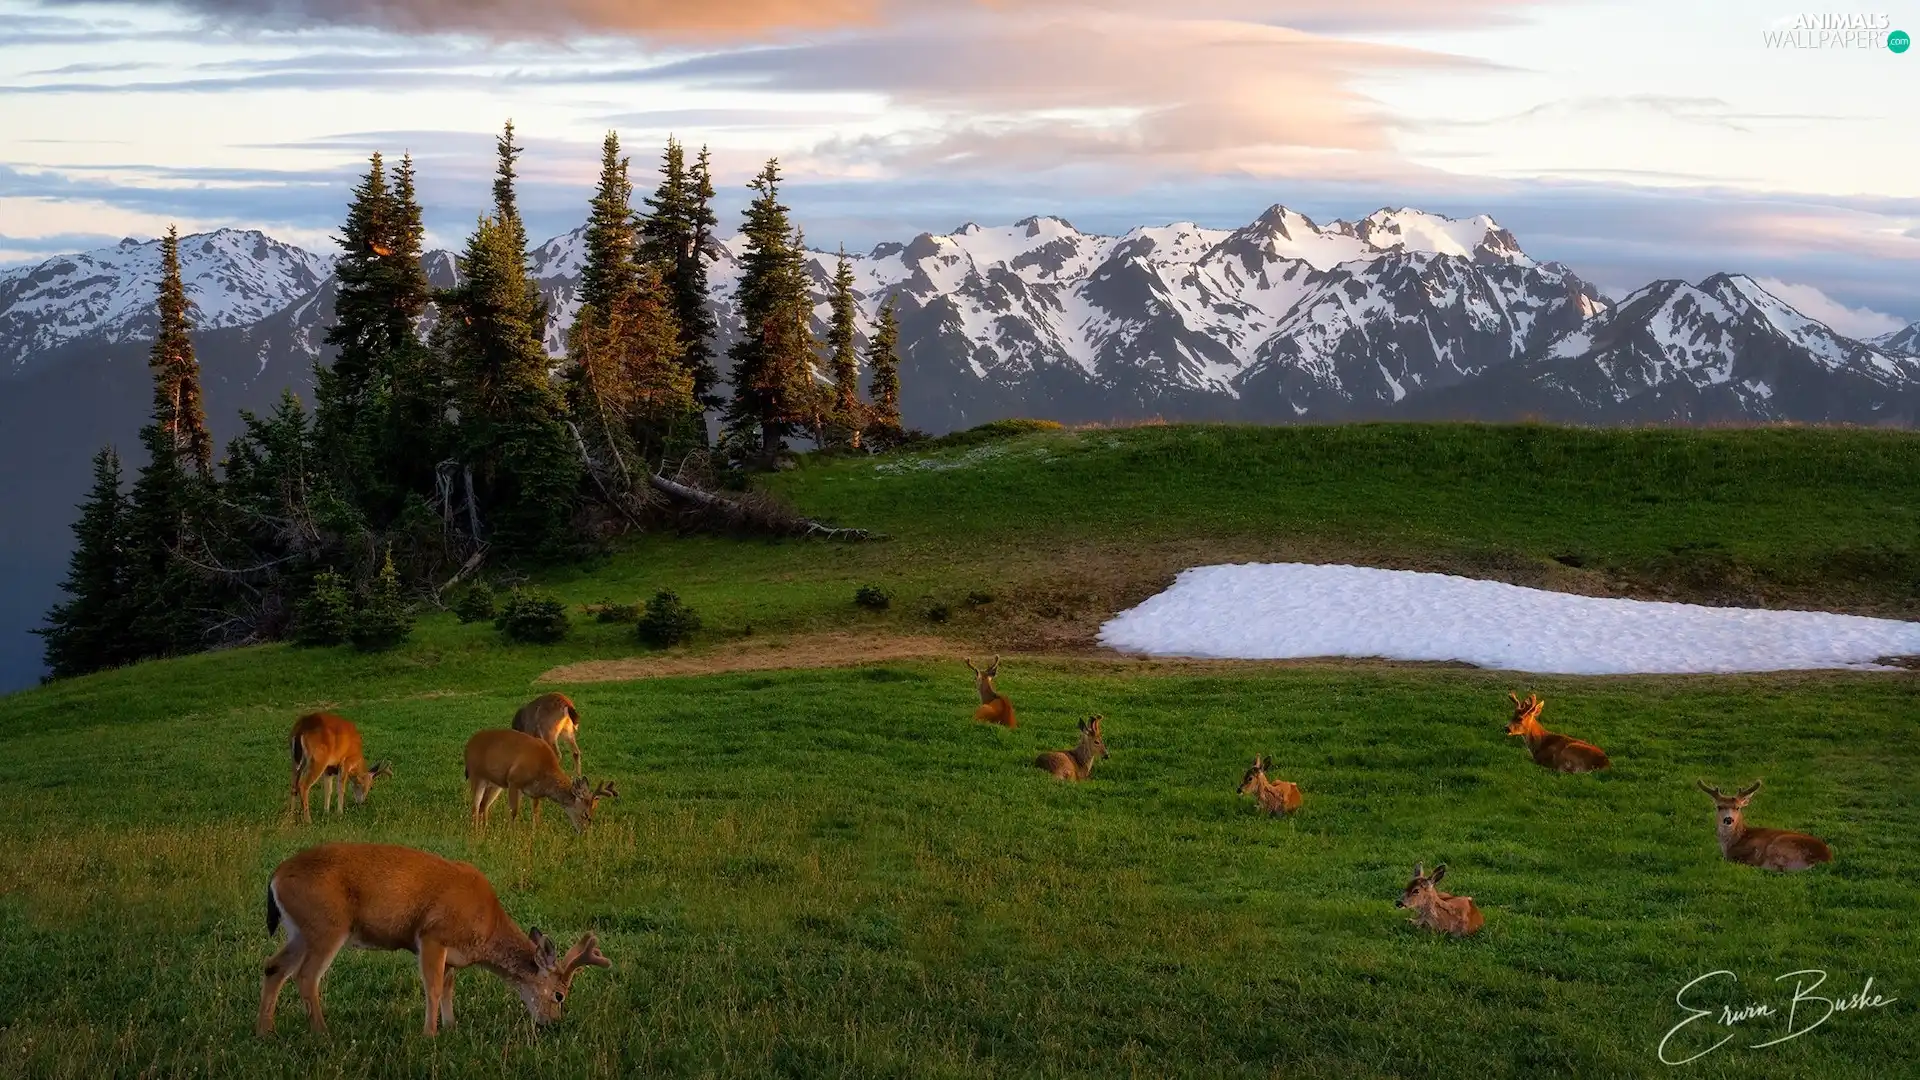 deer, deer, Olympic National Park, viewes, trees, Washington State, car in the meadow, Mountains, The United States, snow, peaks, Snowy